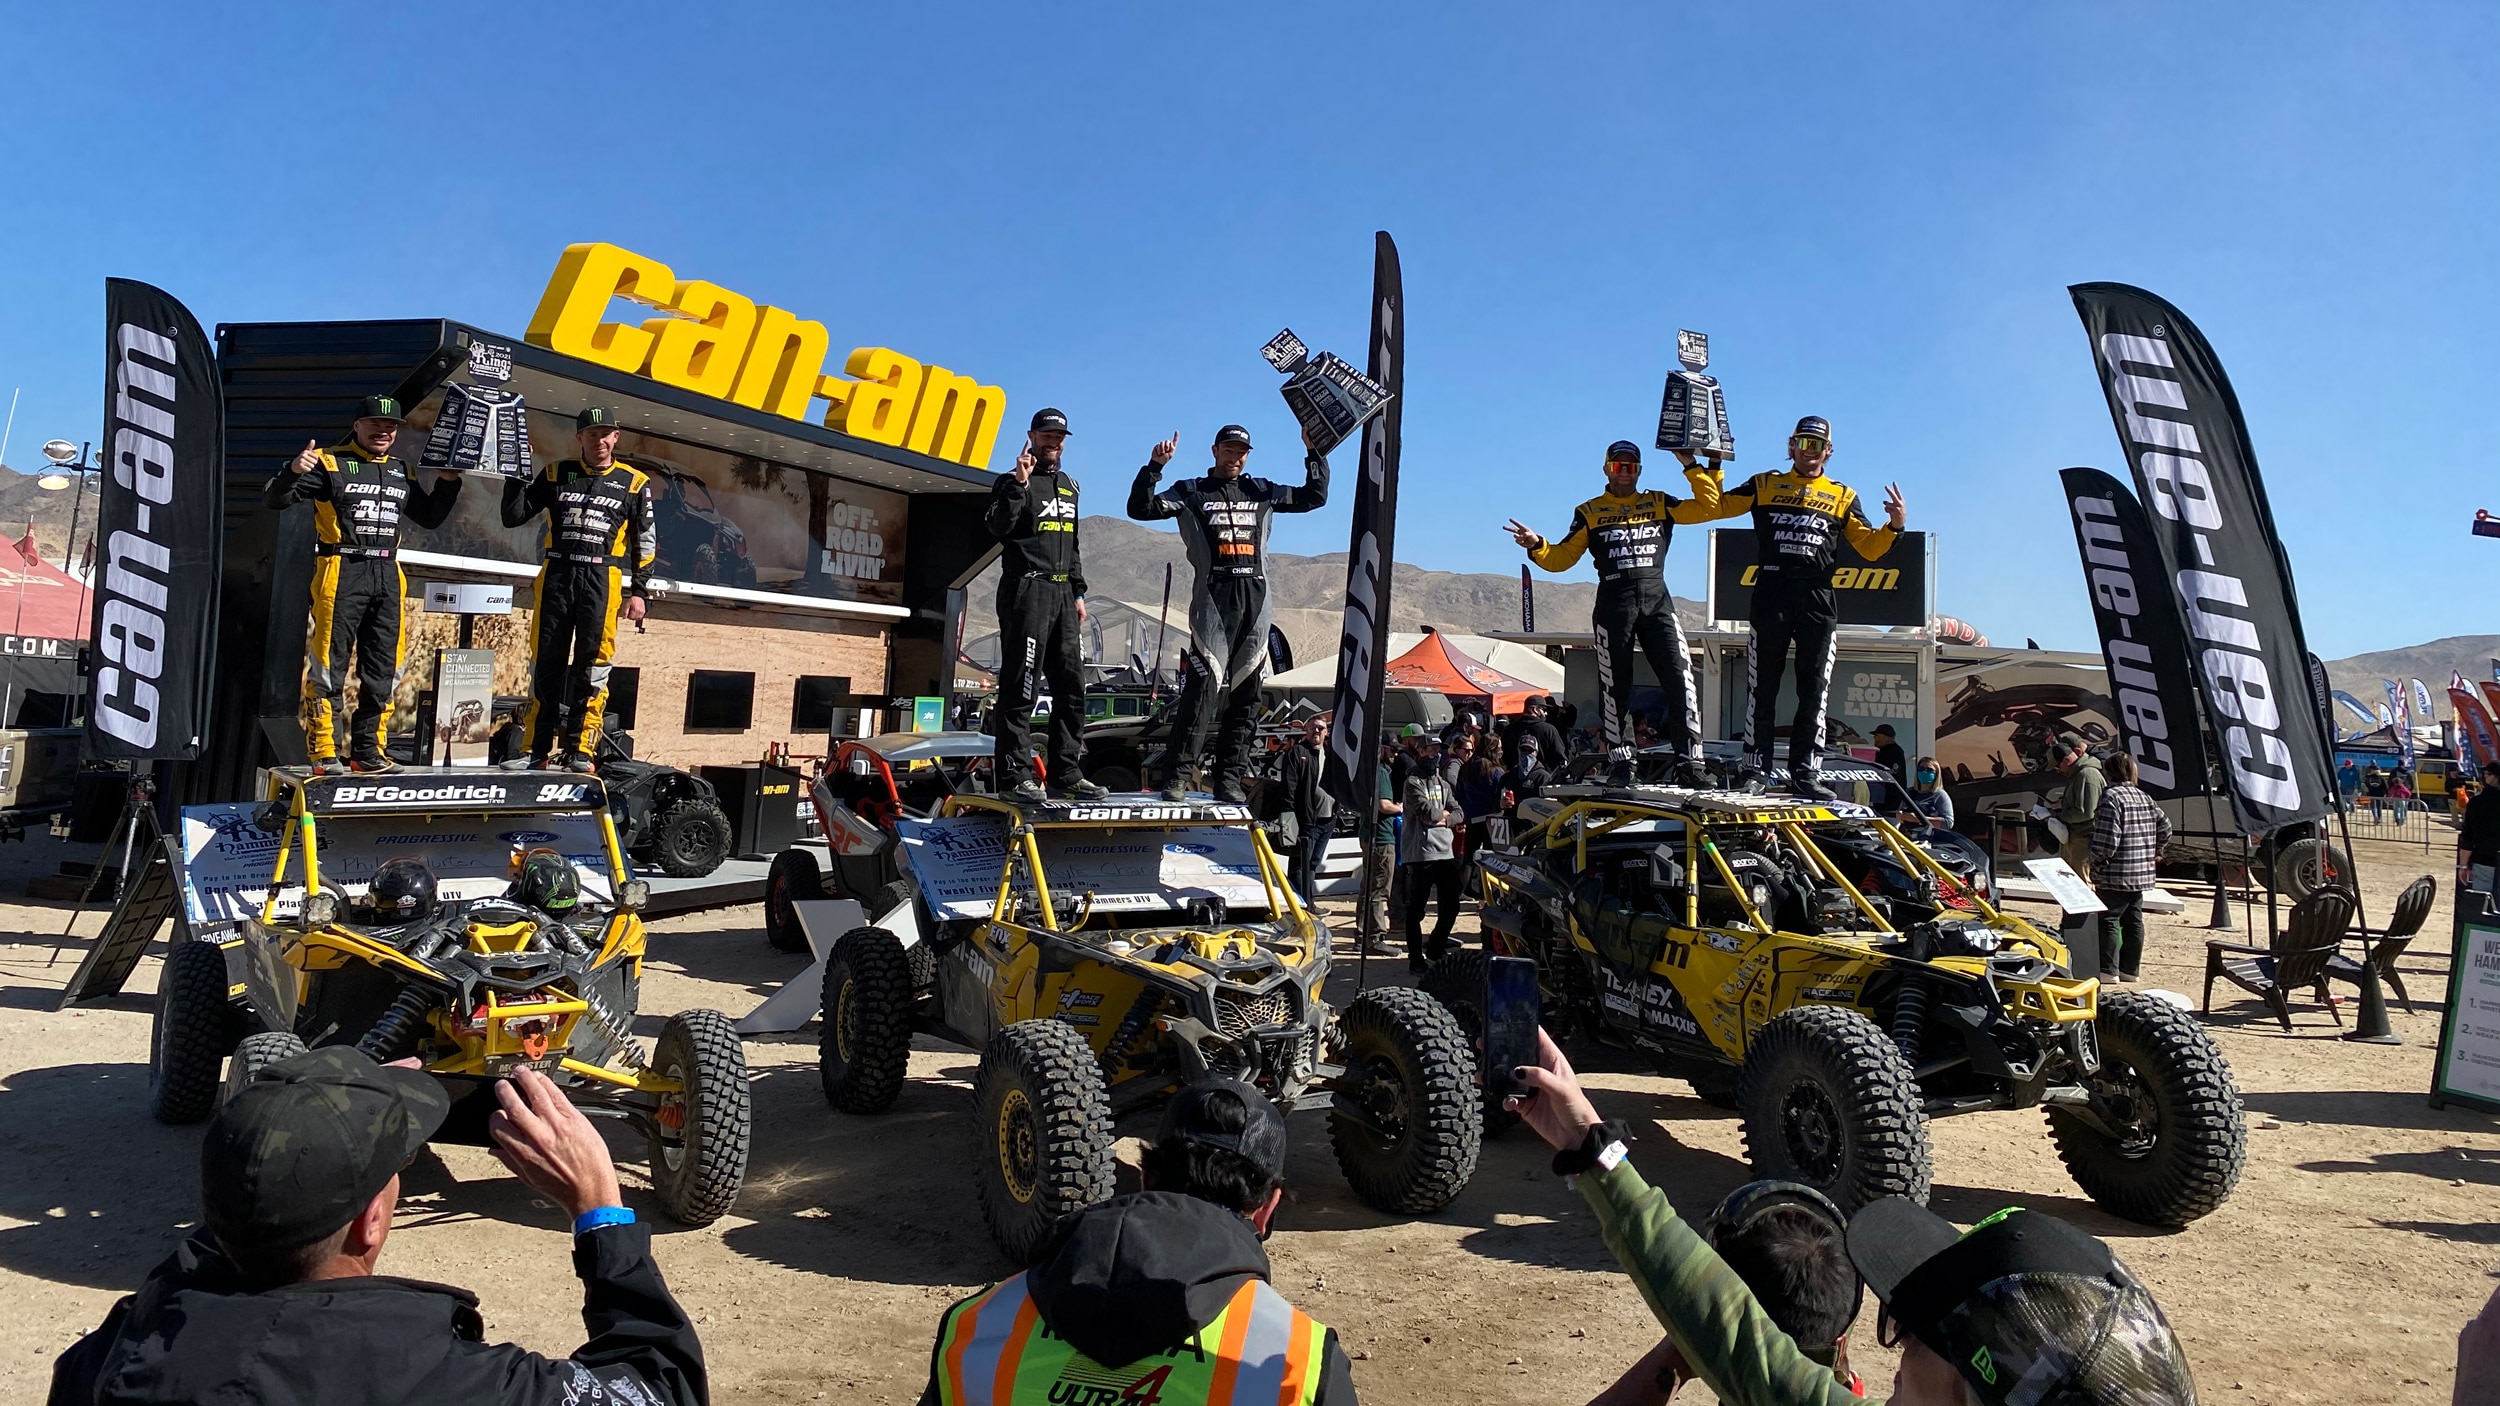 Podium King of the hammers